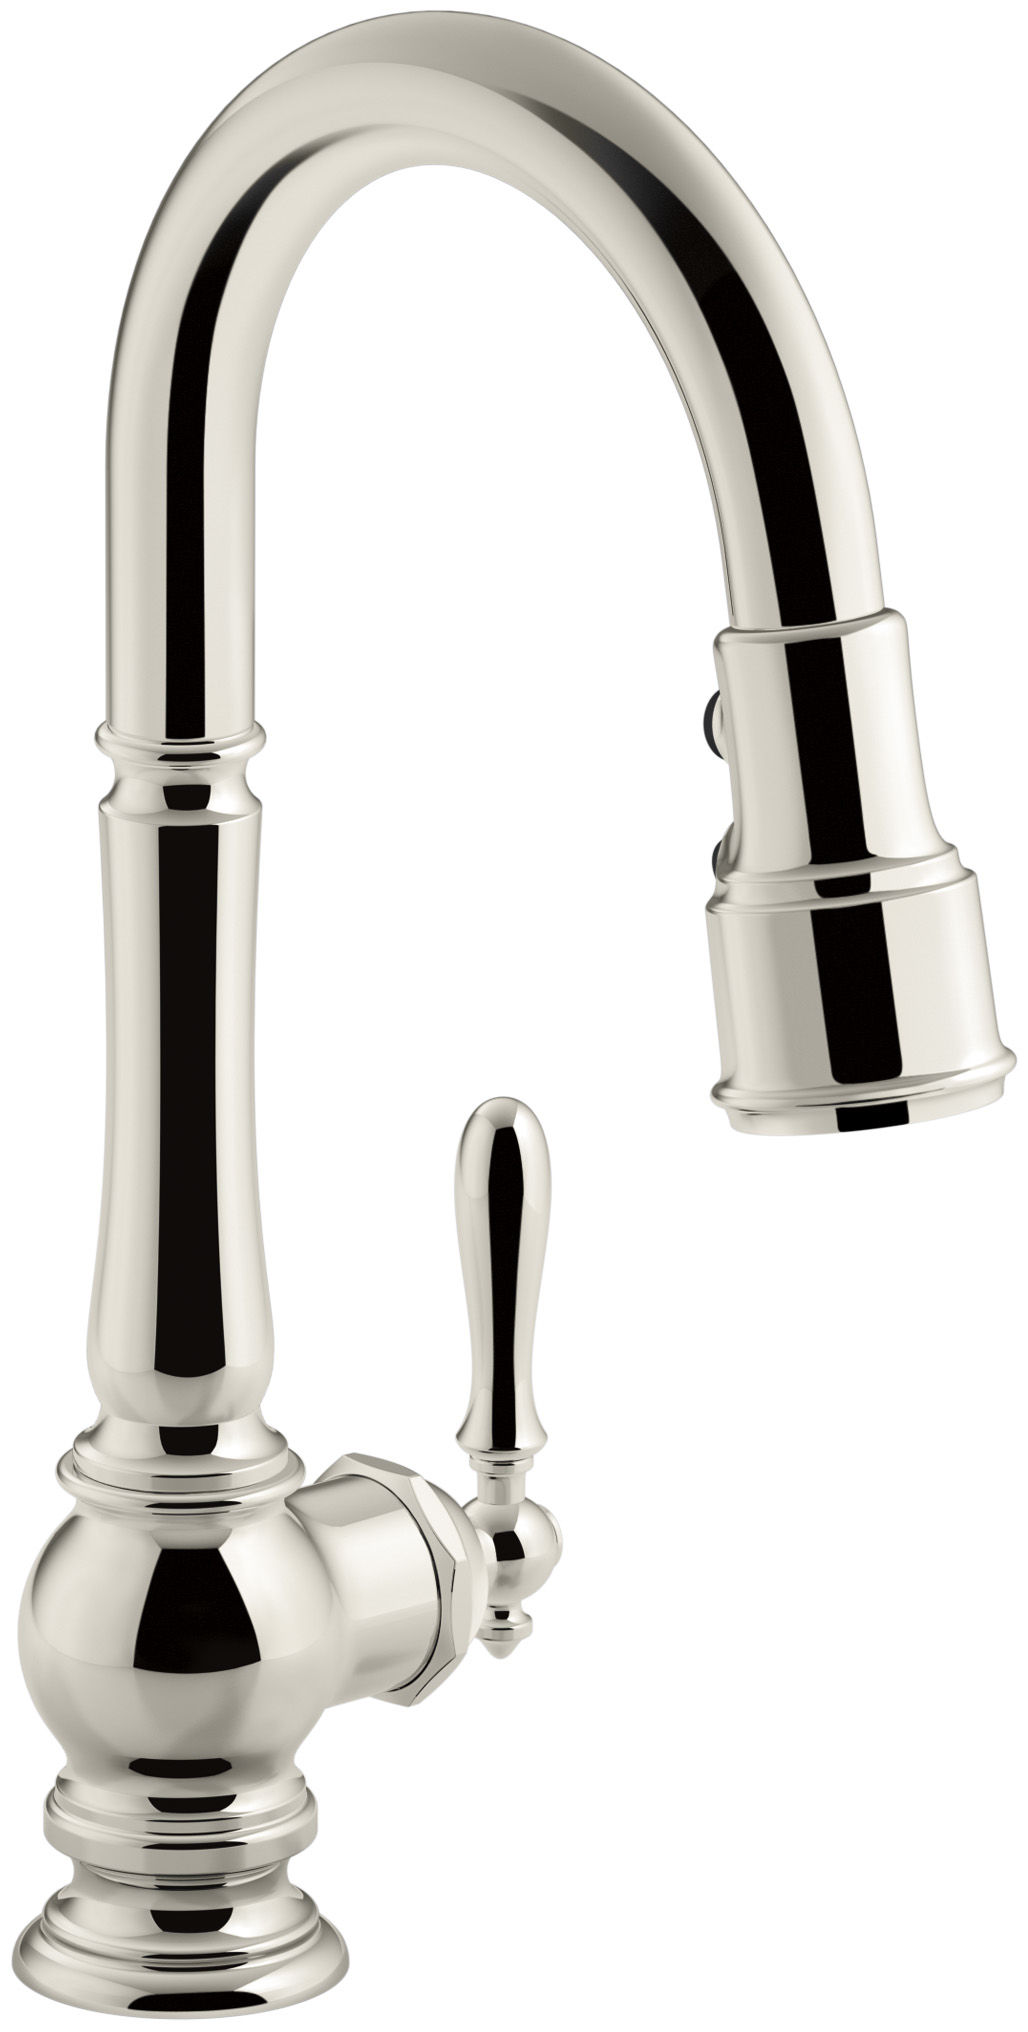 Kohler K 99261 Sn Vibrant Polished Nickel Artifacts 1 5 Gpm Single Hole Pull Down Kitchen Faucet Faucetdirect Com